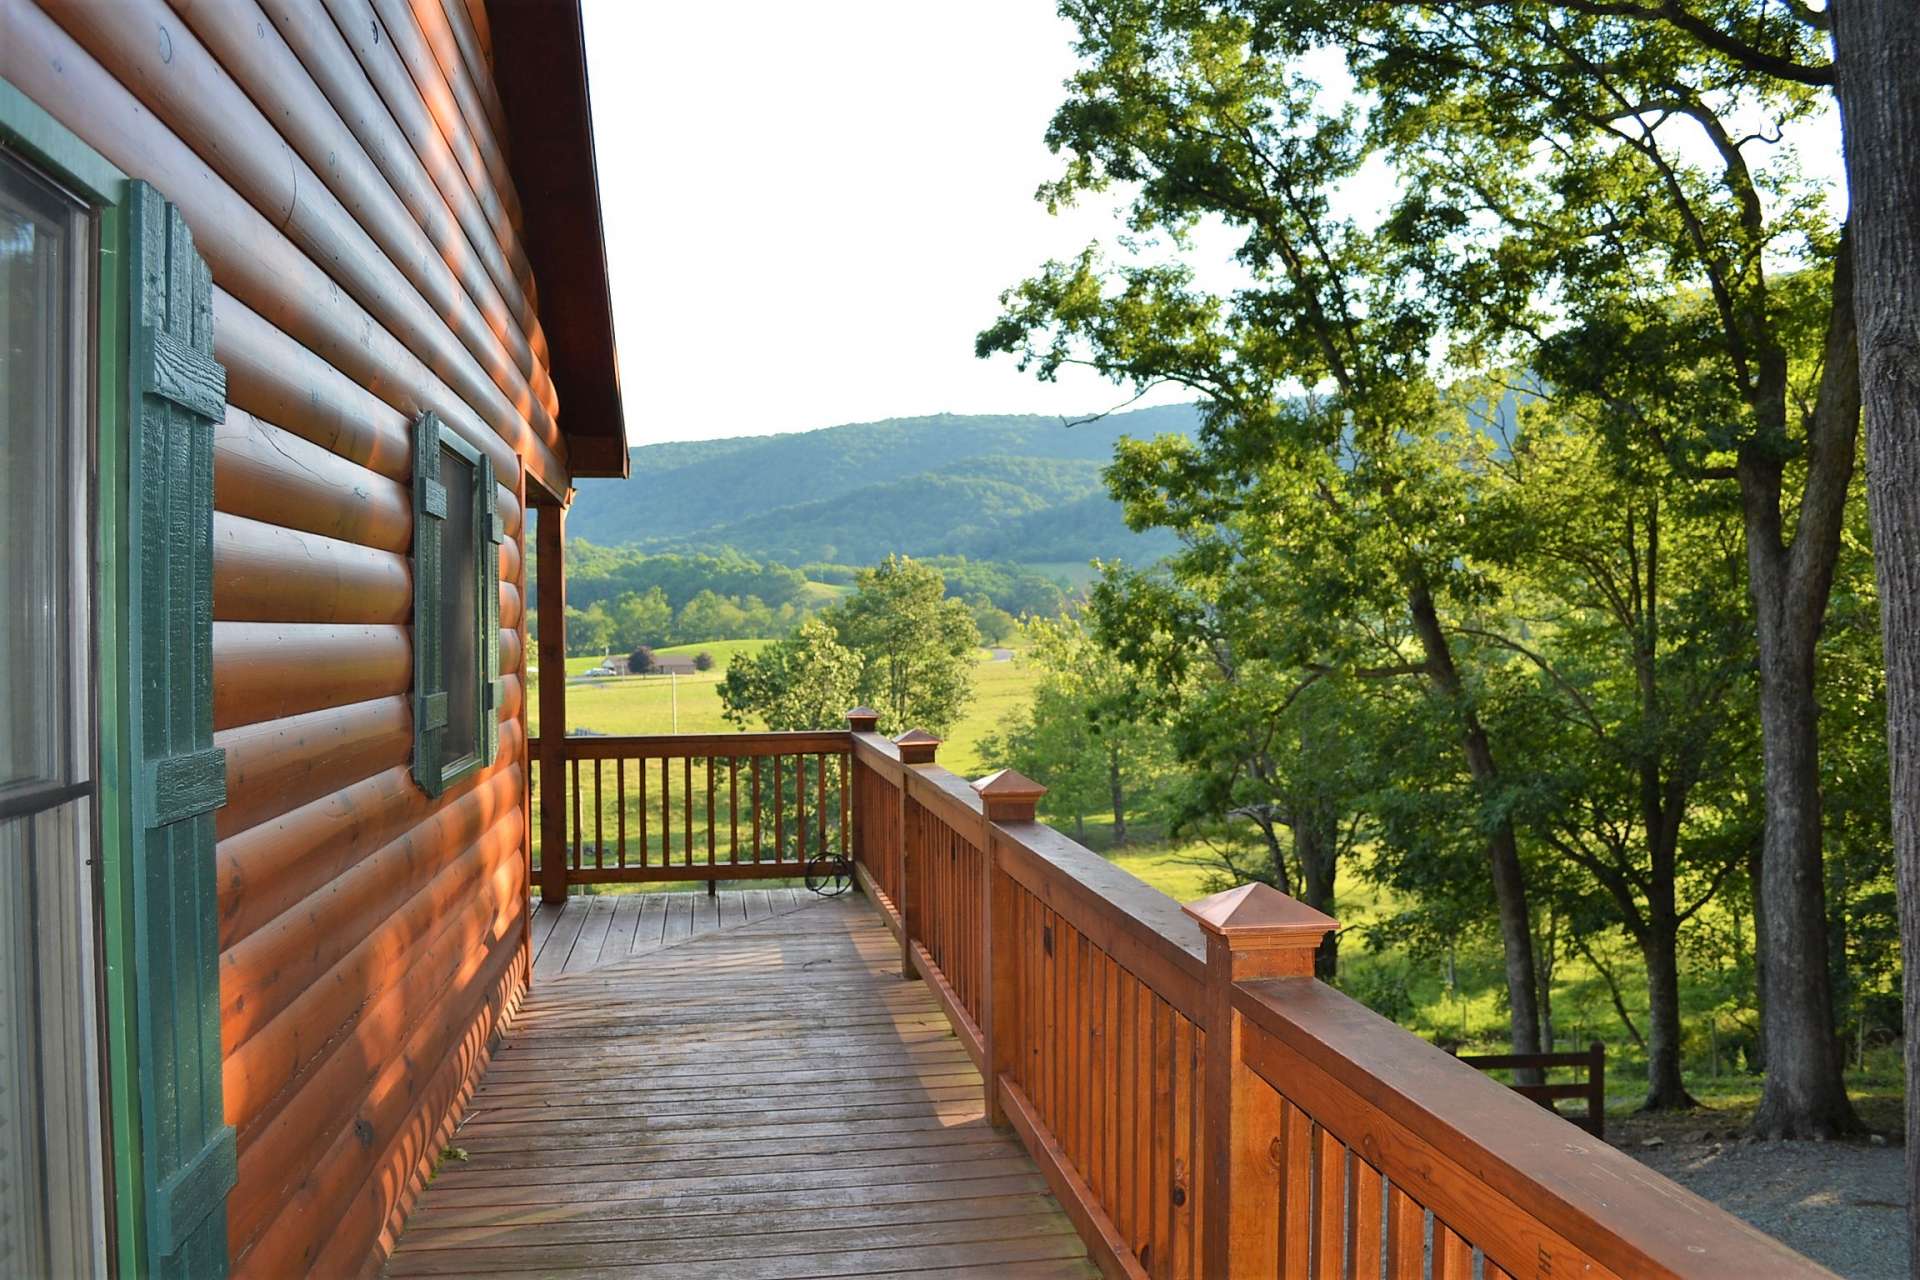 The deck greets you with the views as you enter to the front covered porch.